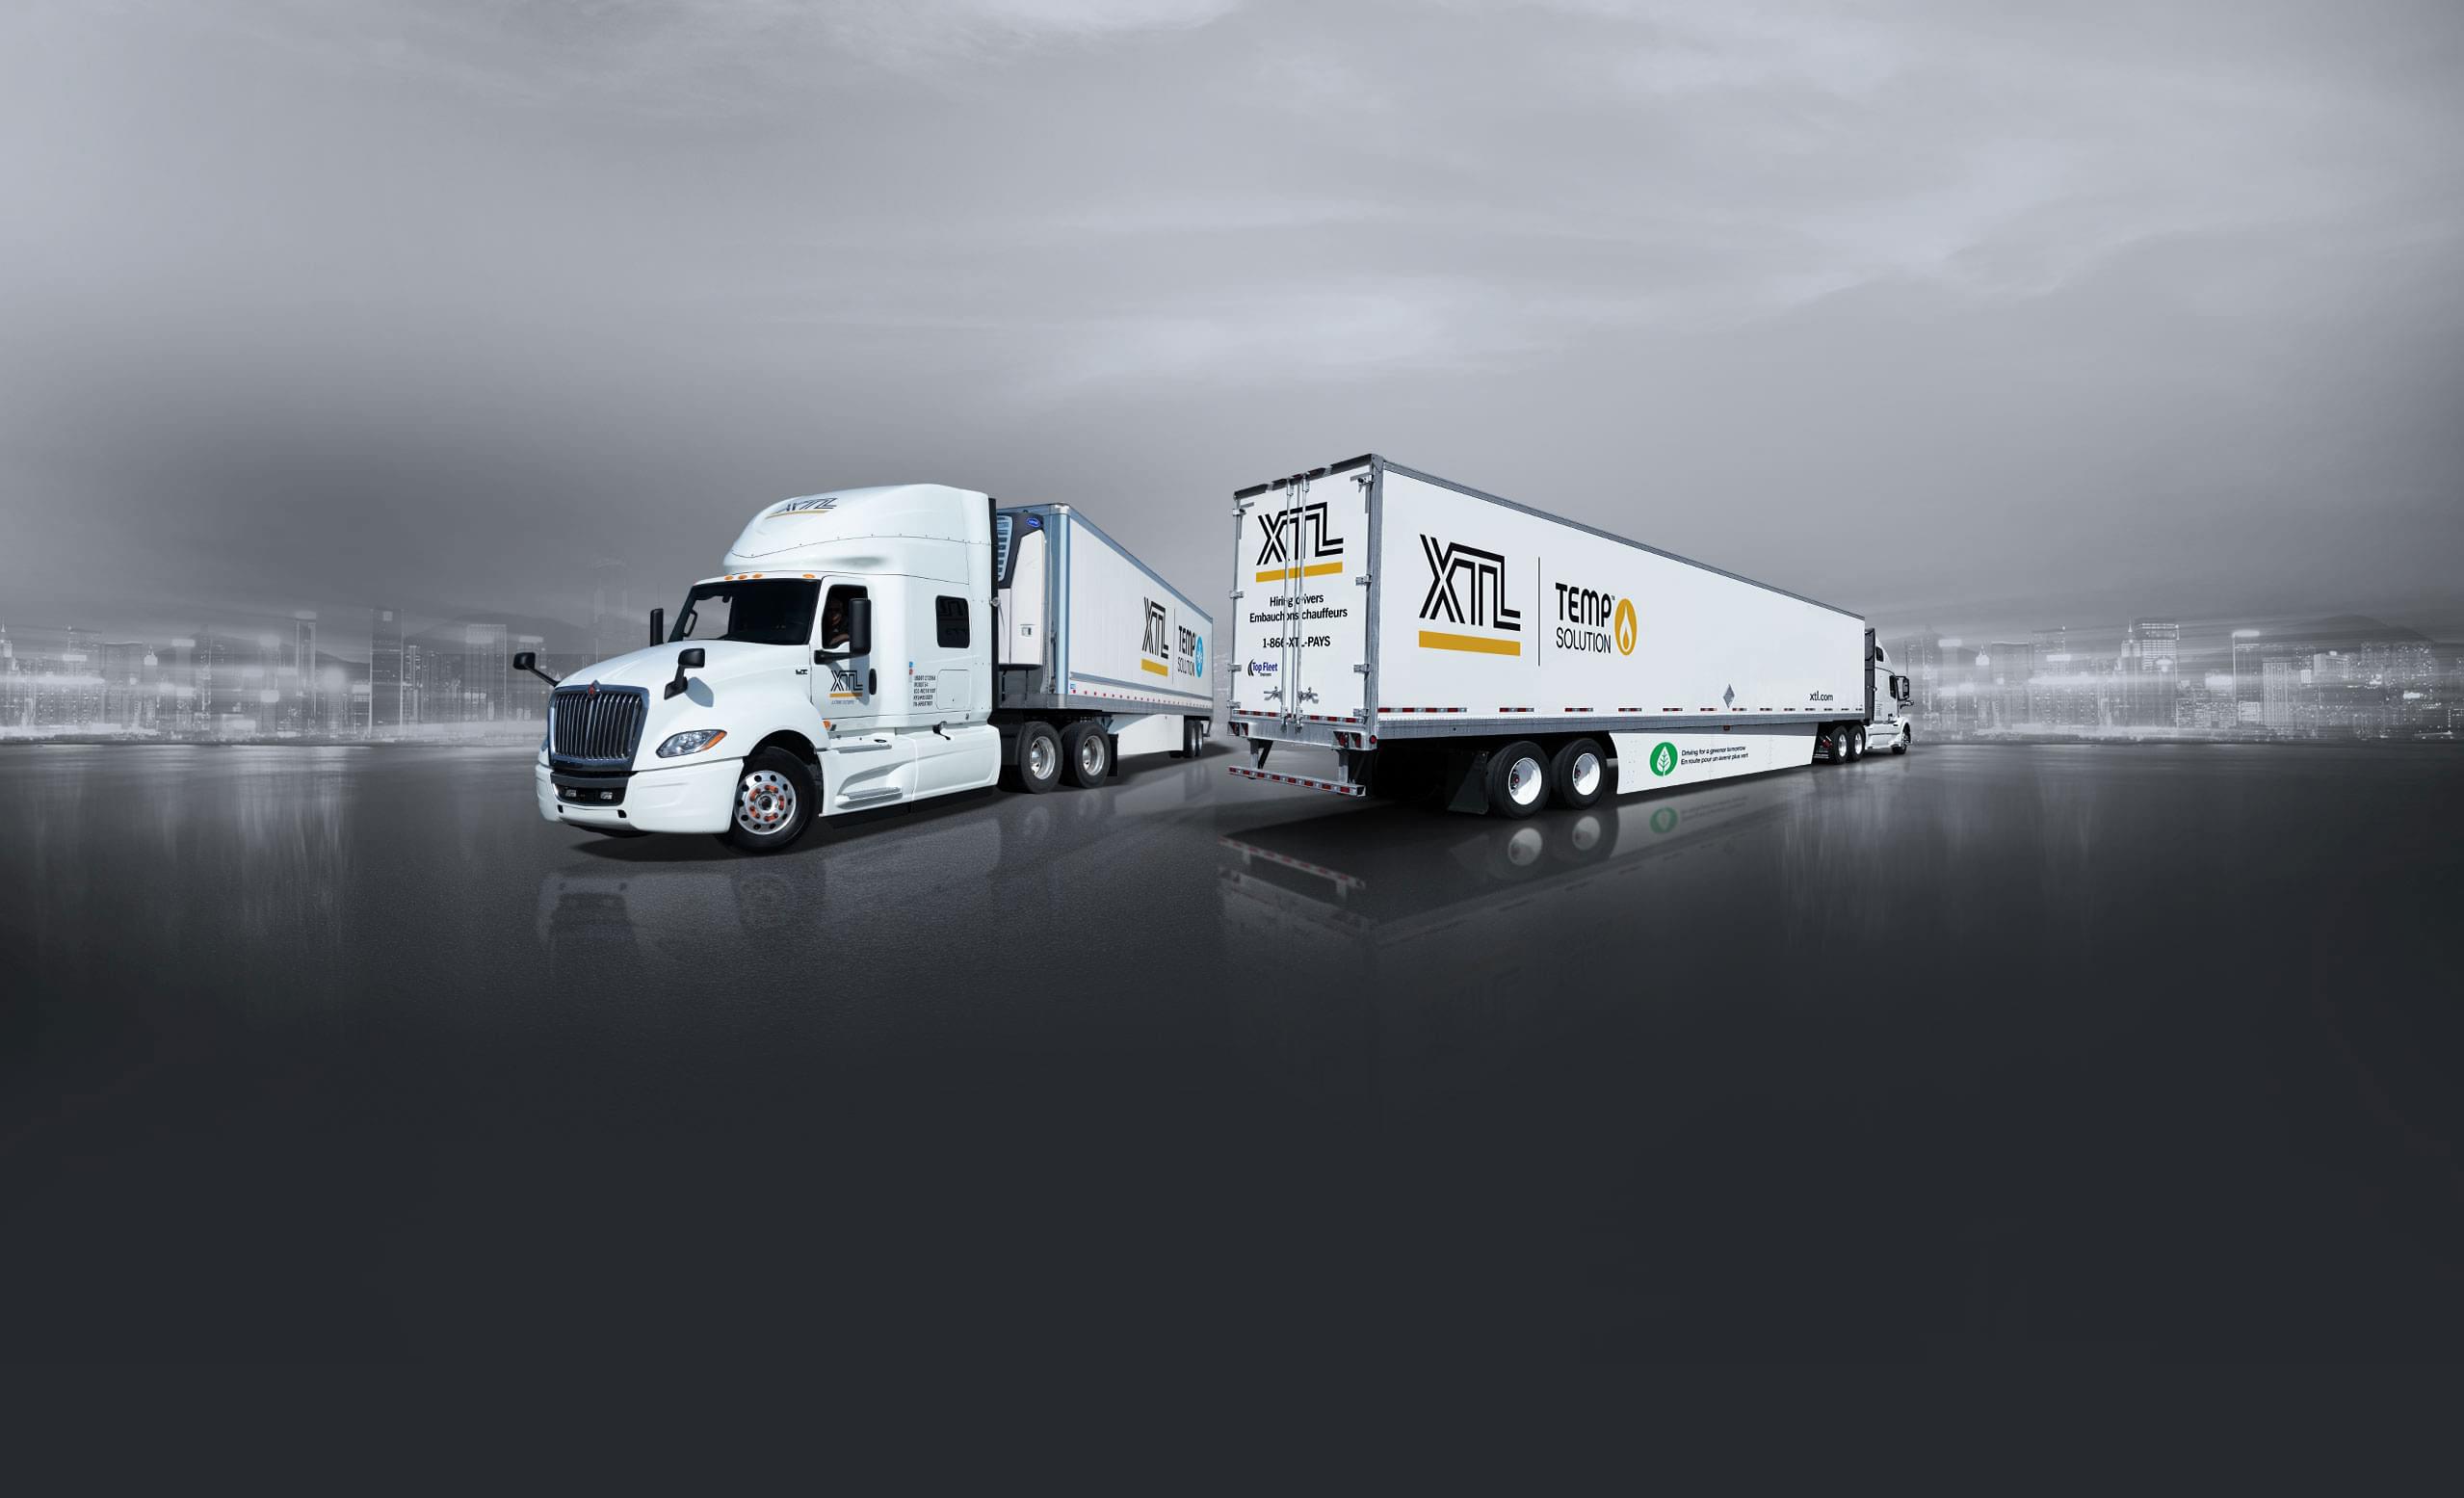 Two XTL transports with refrigerated and heated temperature controlled transport temp solution trailers